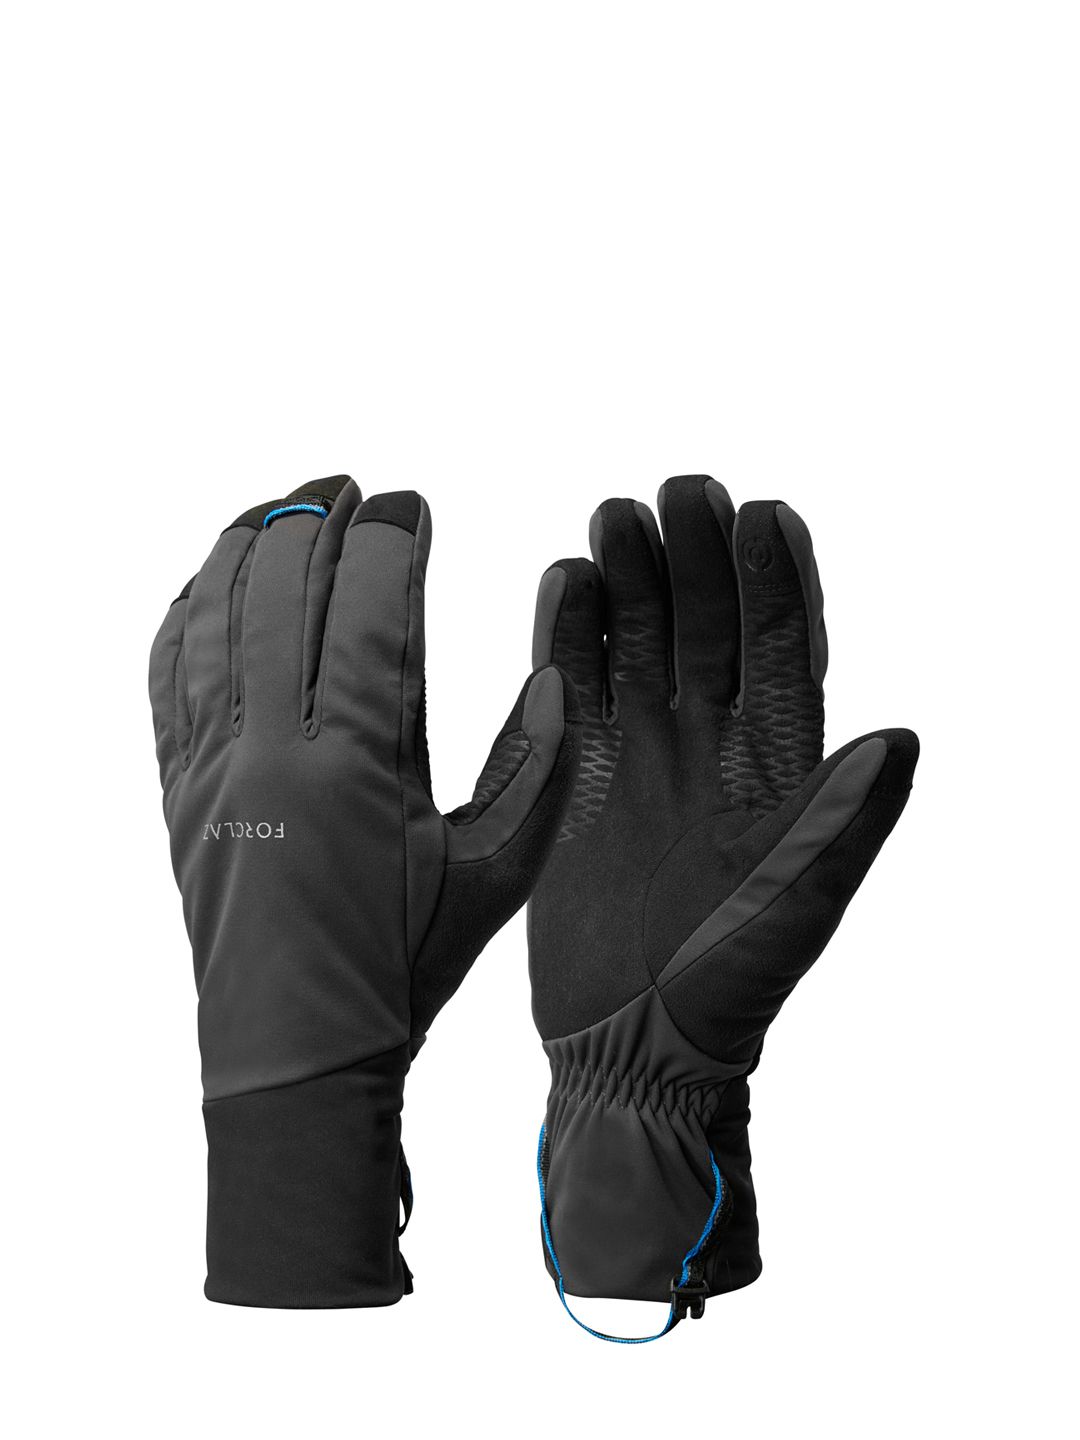 FORCLAZ By Decathlon Adults Black Solid Mountain Trekking Windproof Gloves Price in India